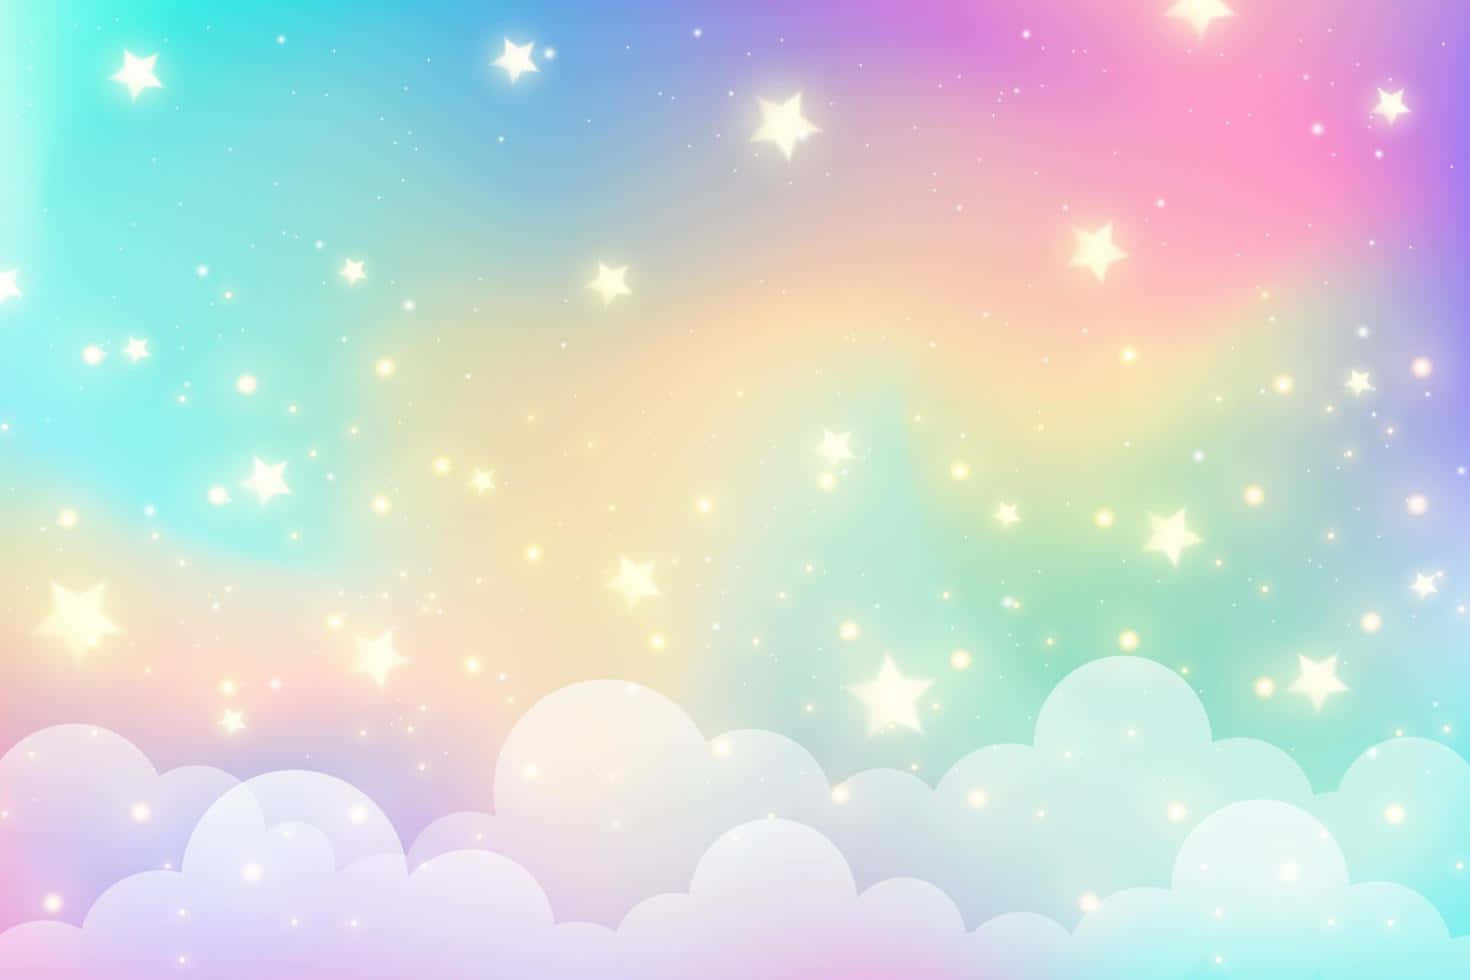 A colorful and uplifting pastel background.